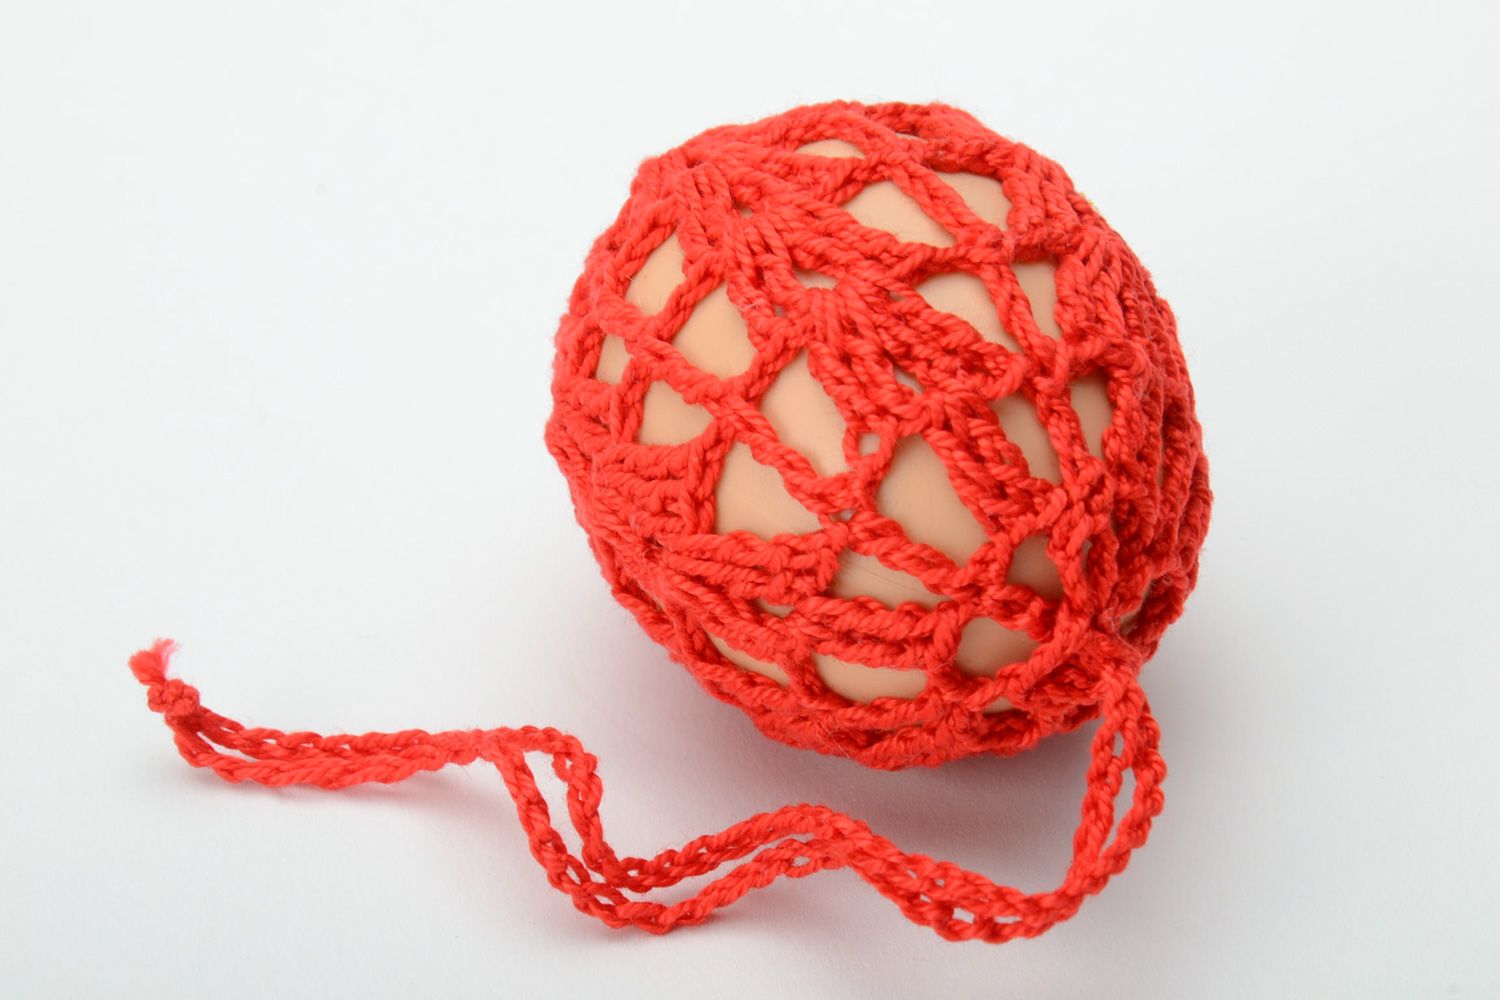 Homemade red decorative Easter egg woven over with threads photo 3